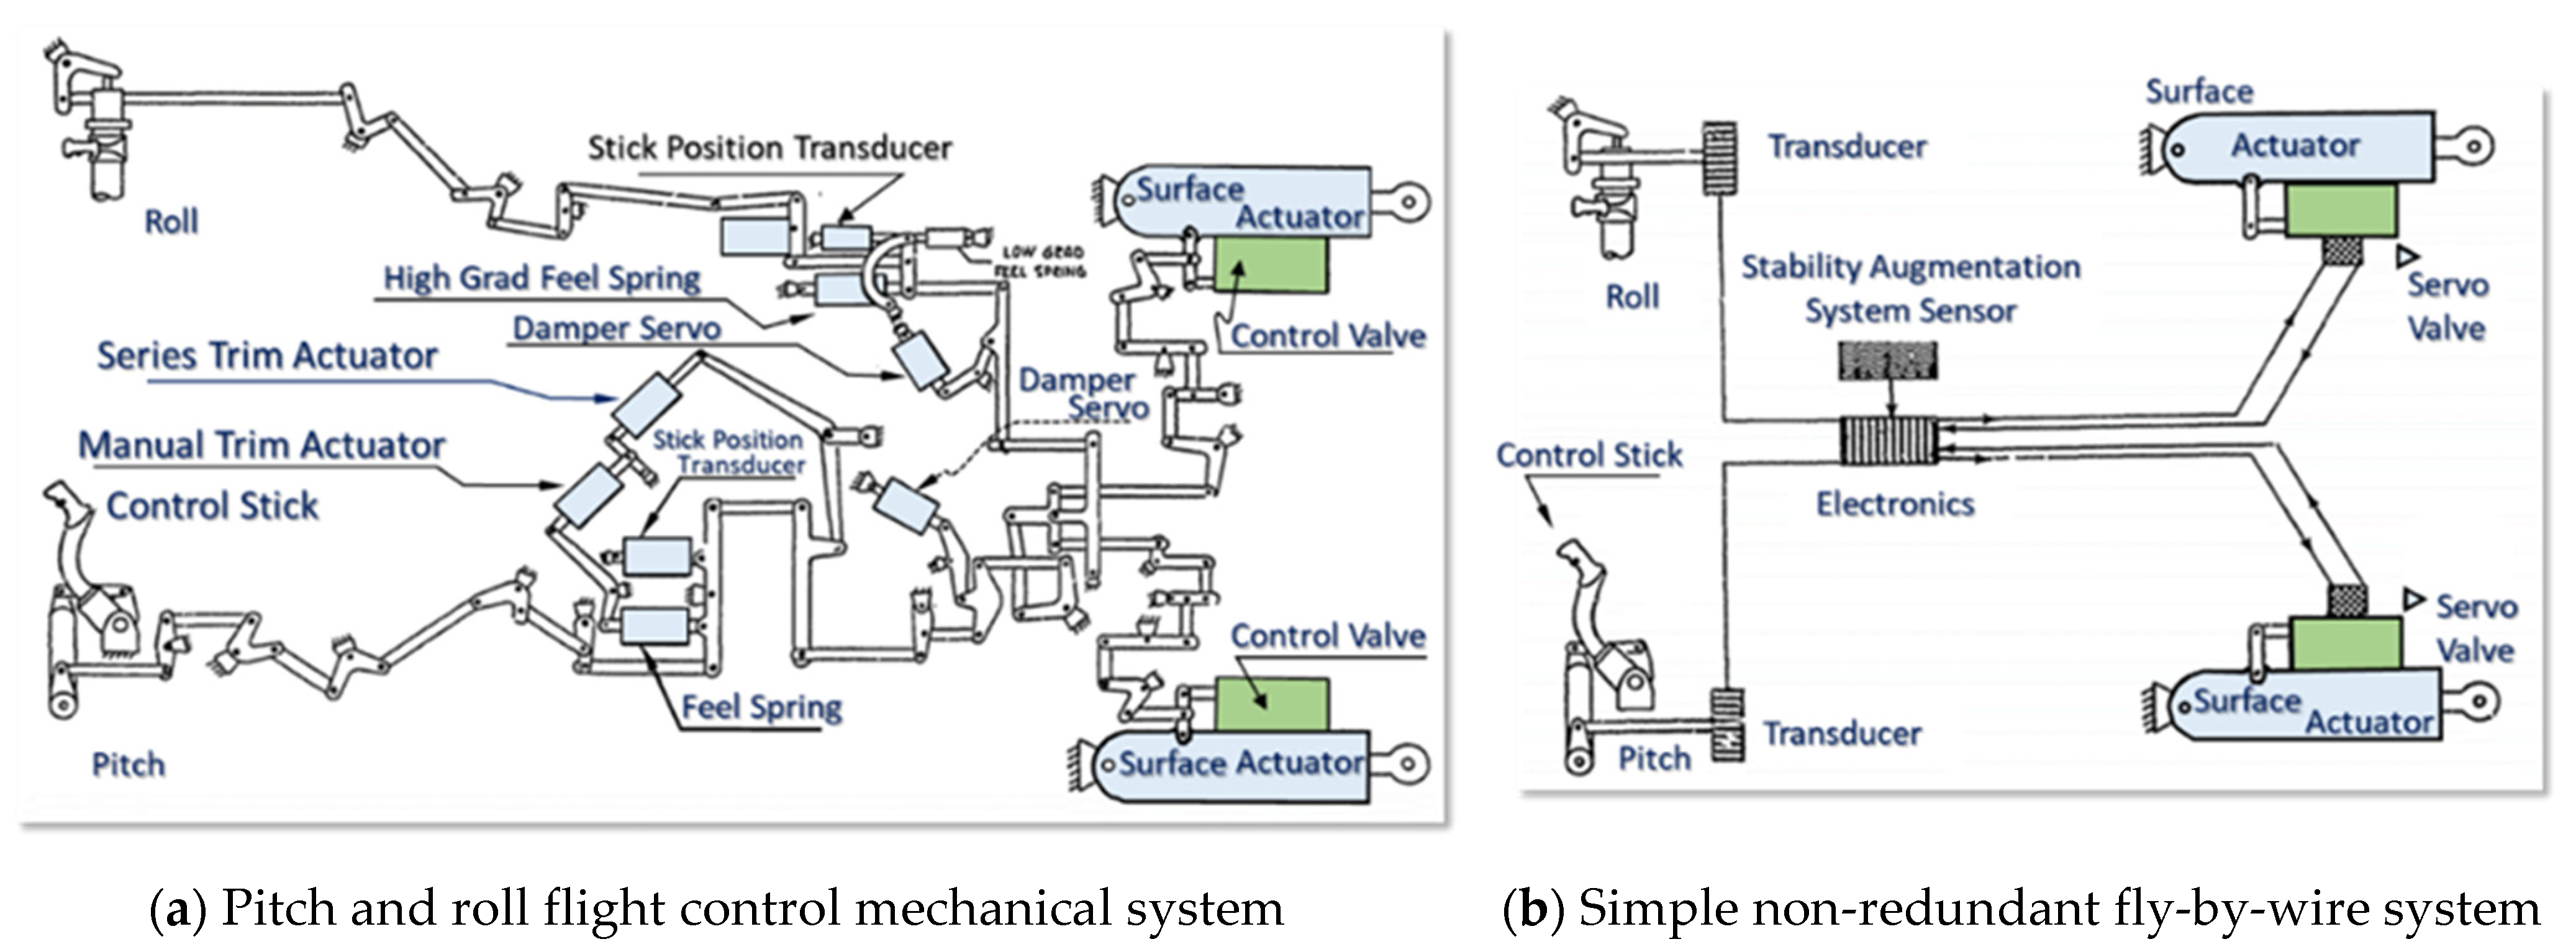 Diagram of lung model. A high-precision computer-controlled linear